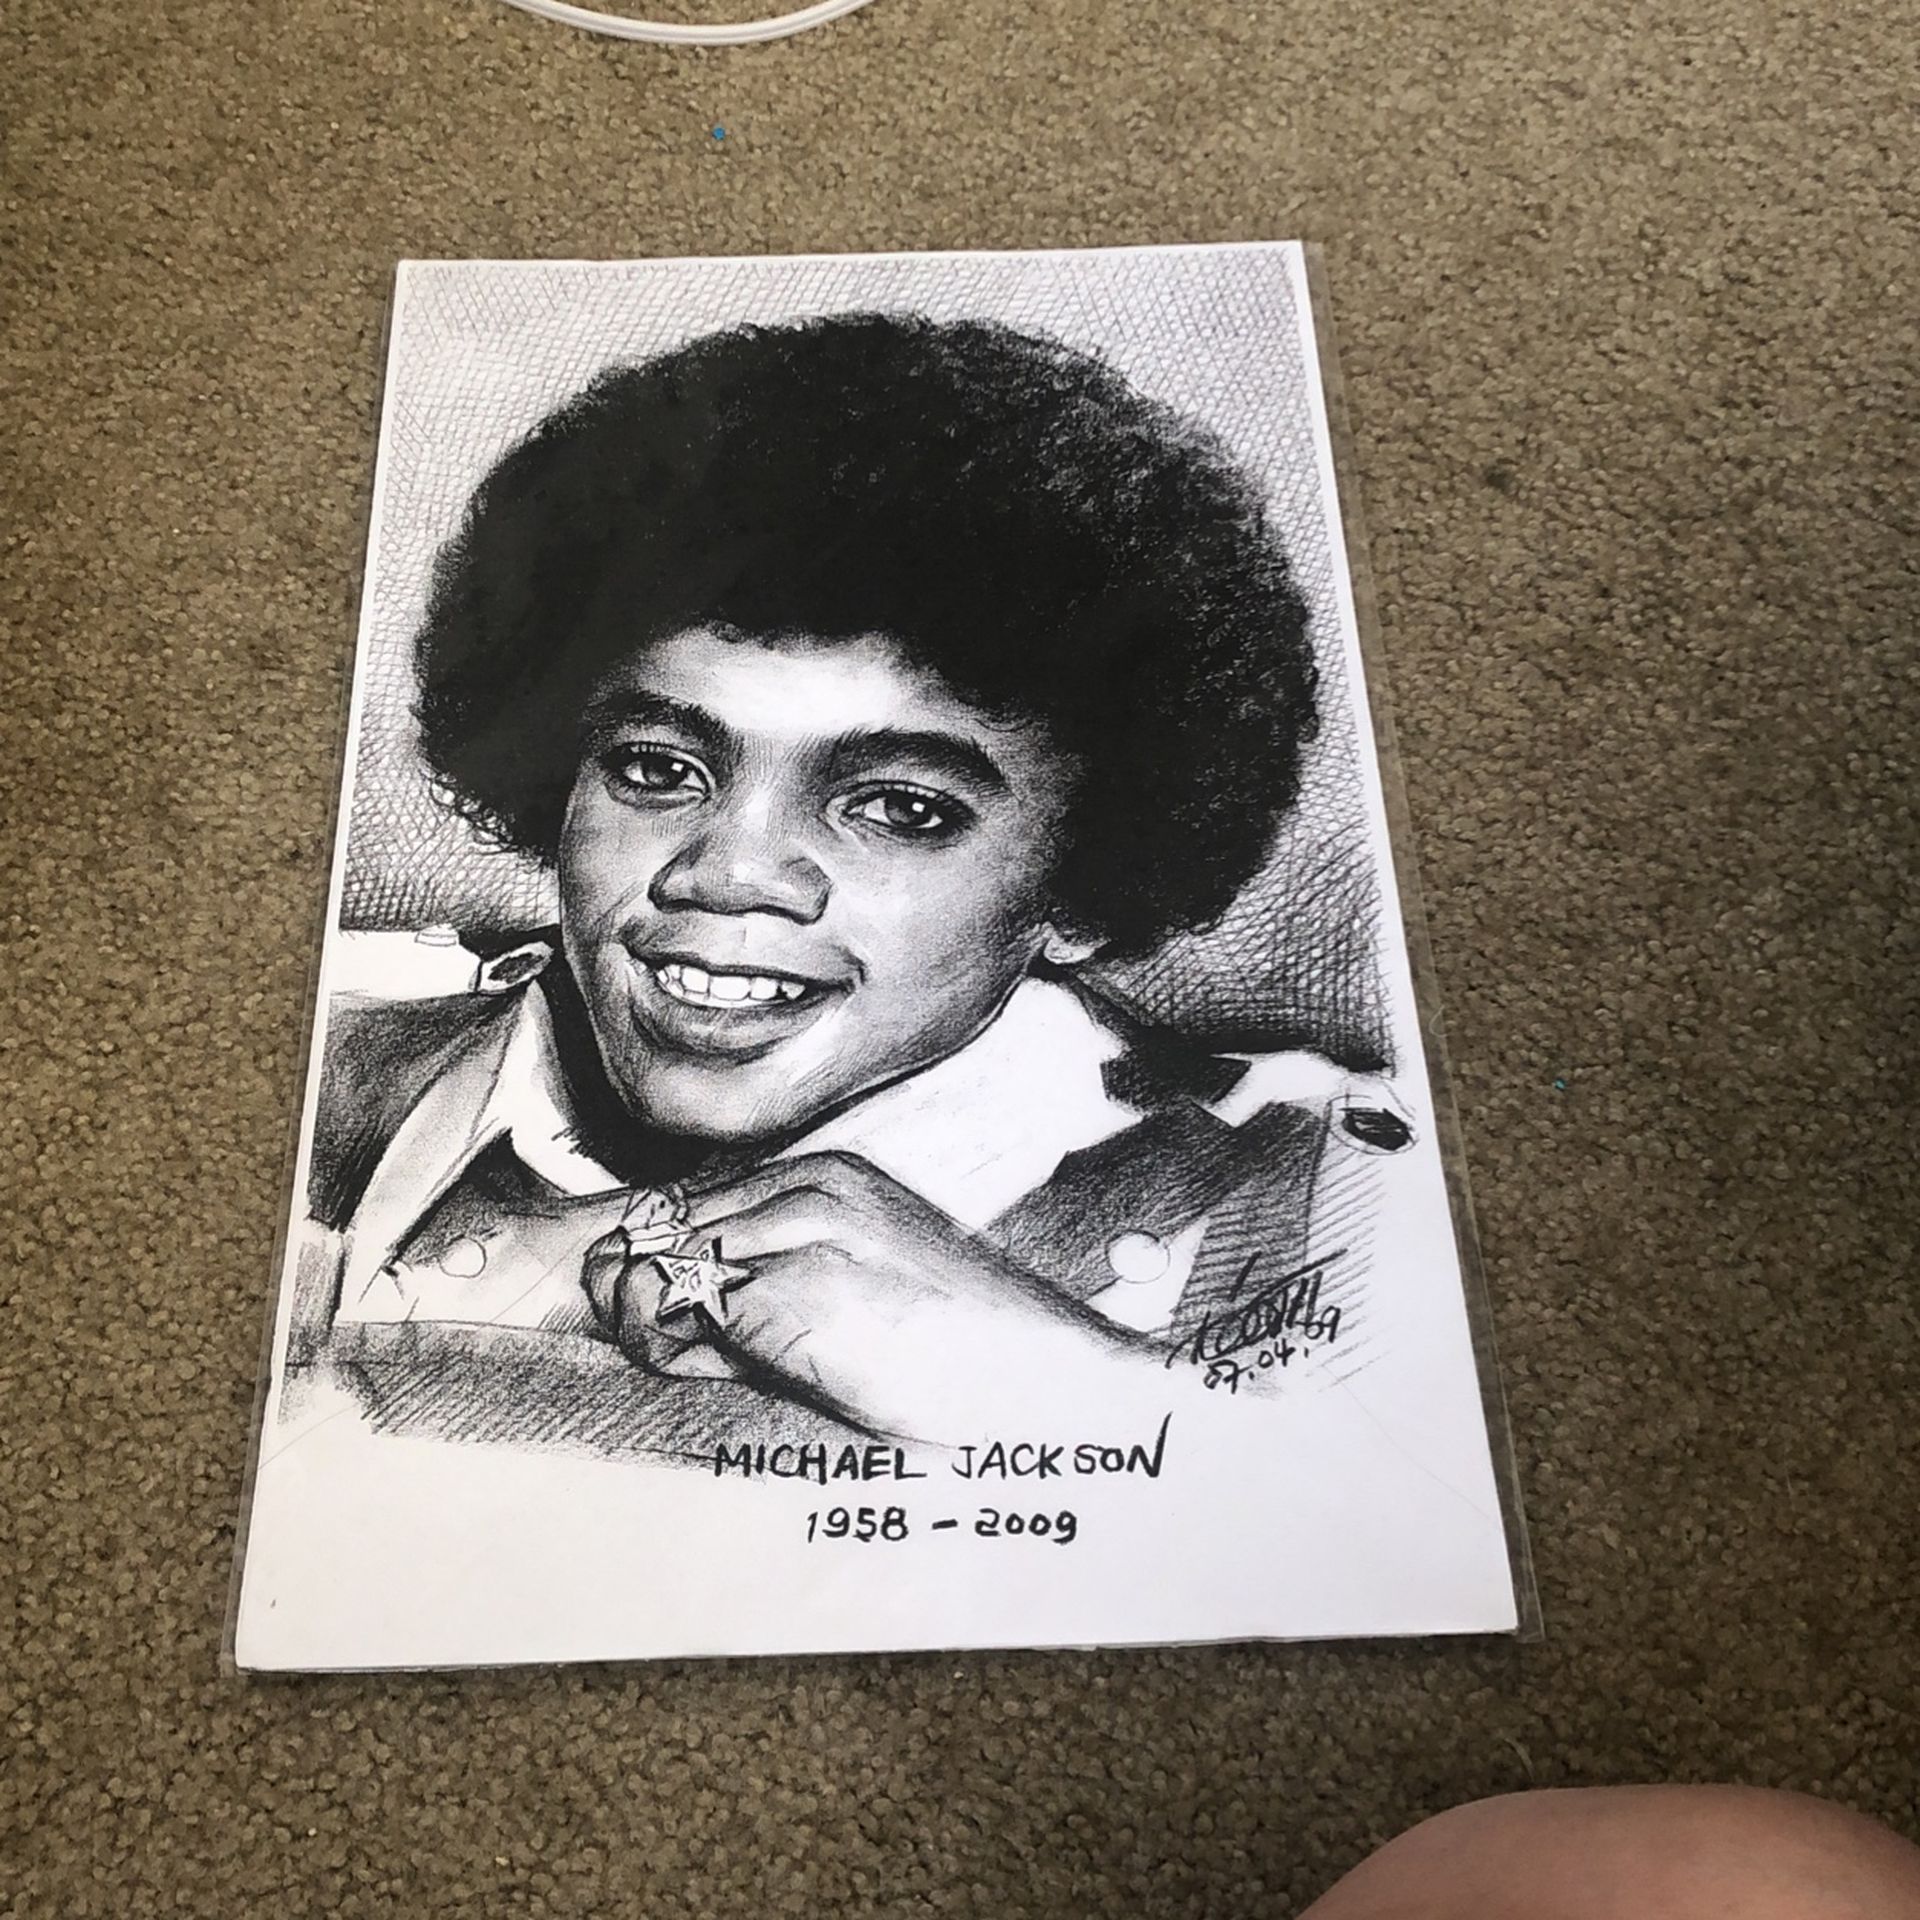 Michael Jackson Photo Signed By Him 